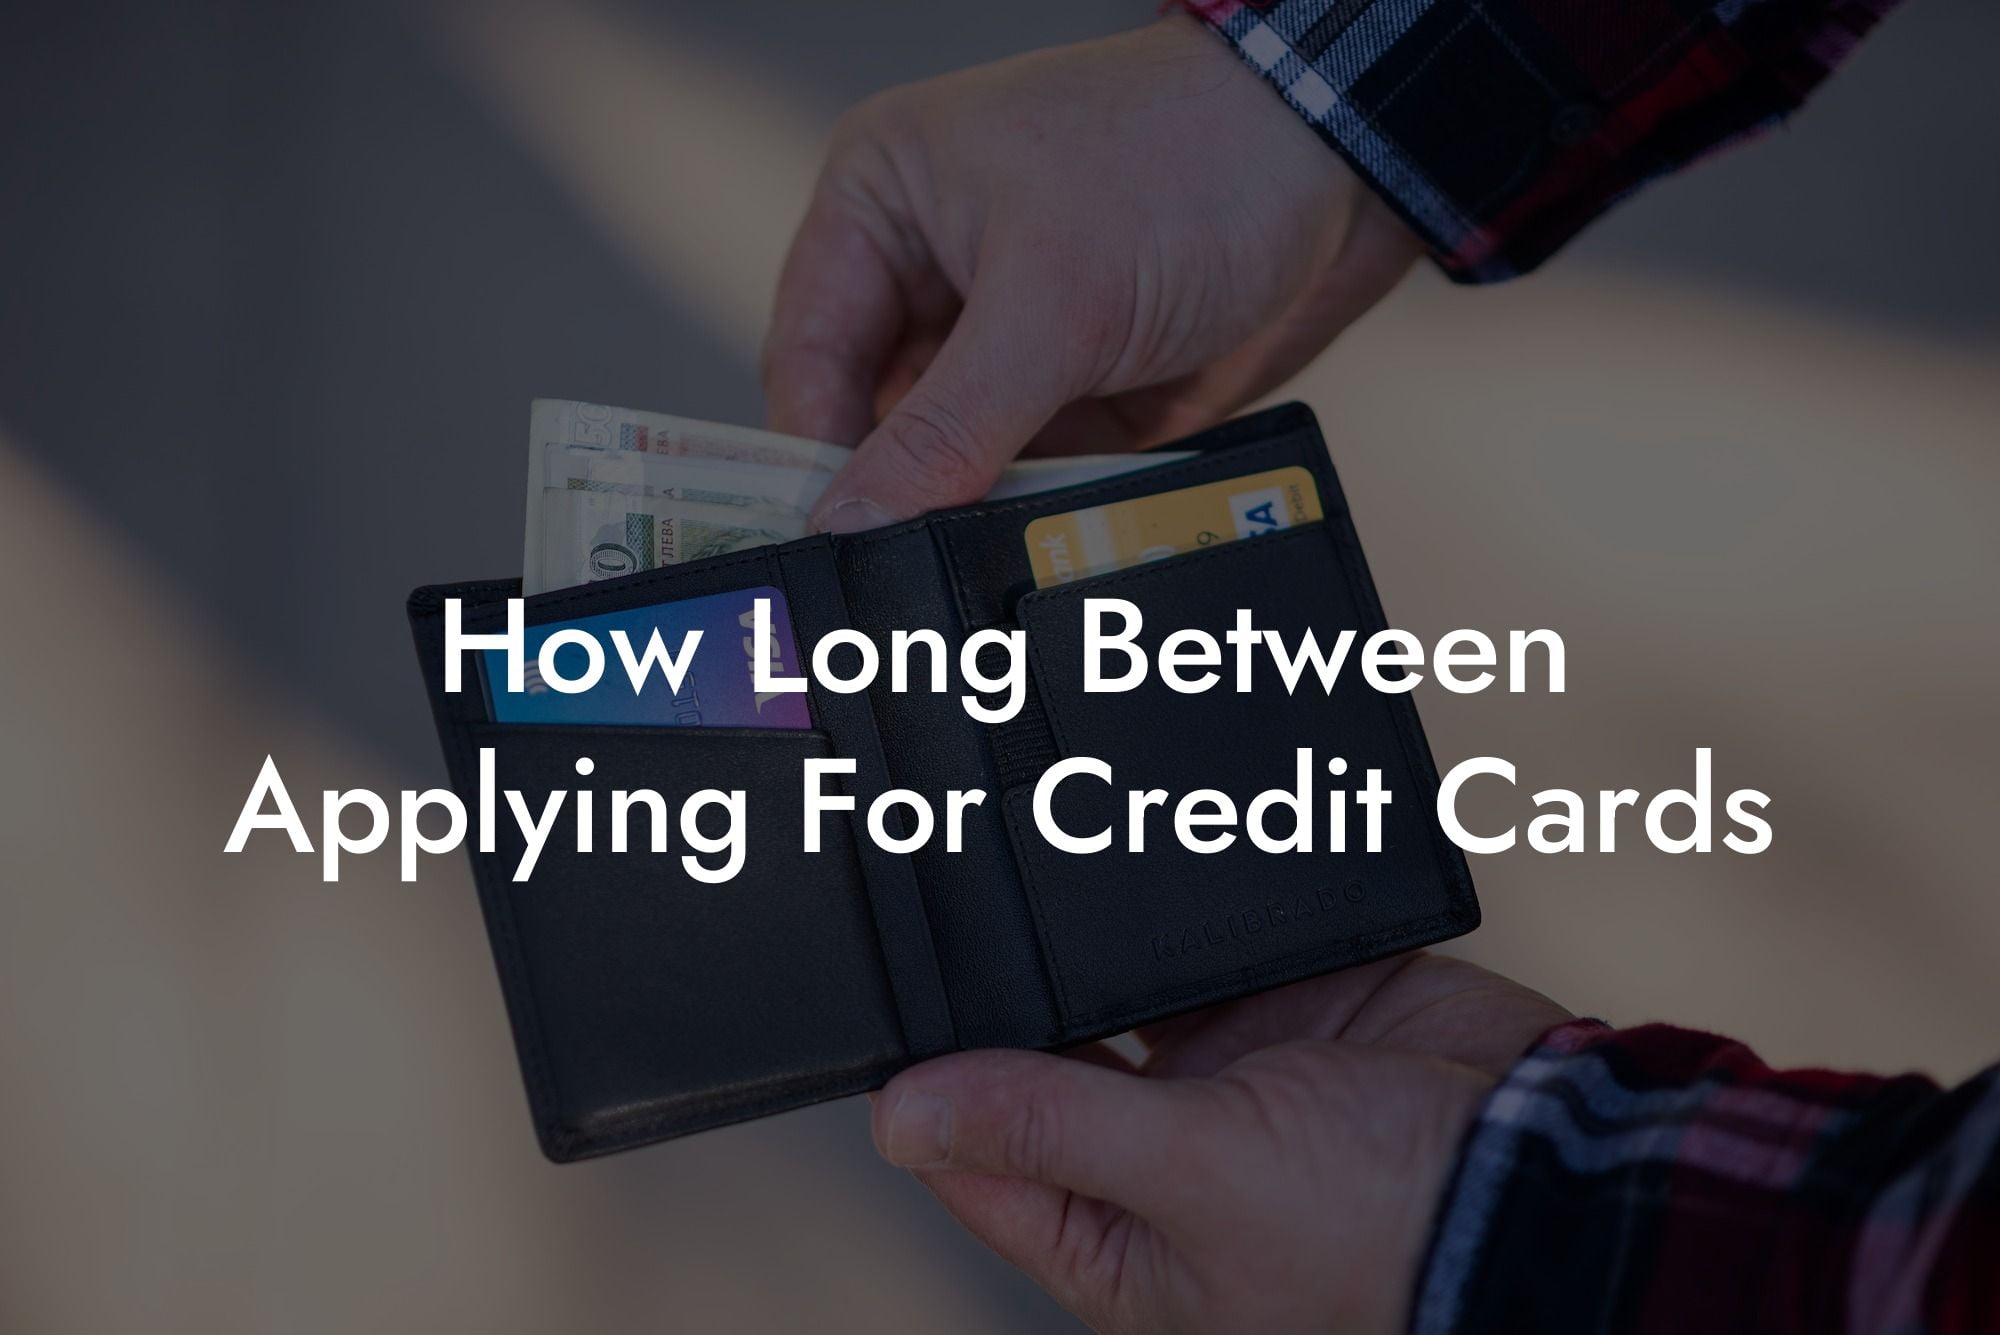 How Long Between Applying For Credit Cards